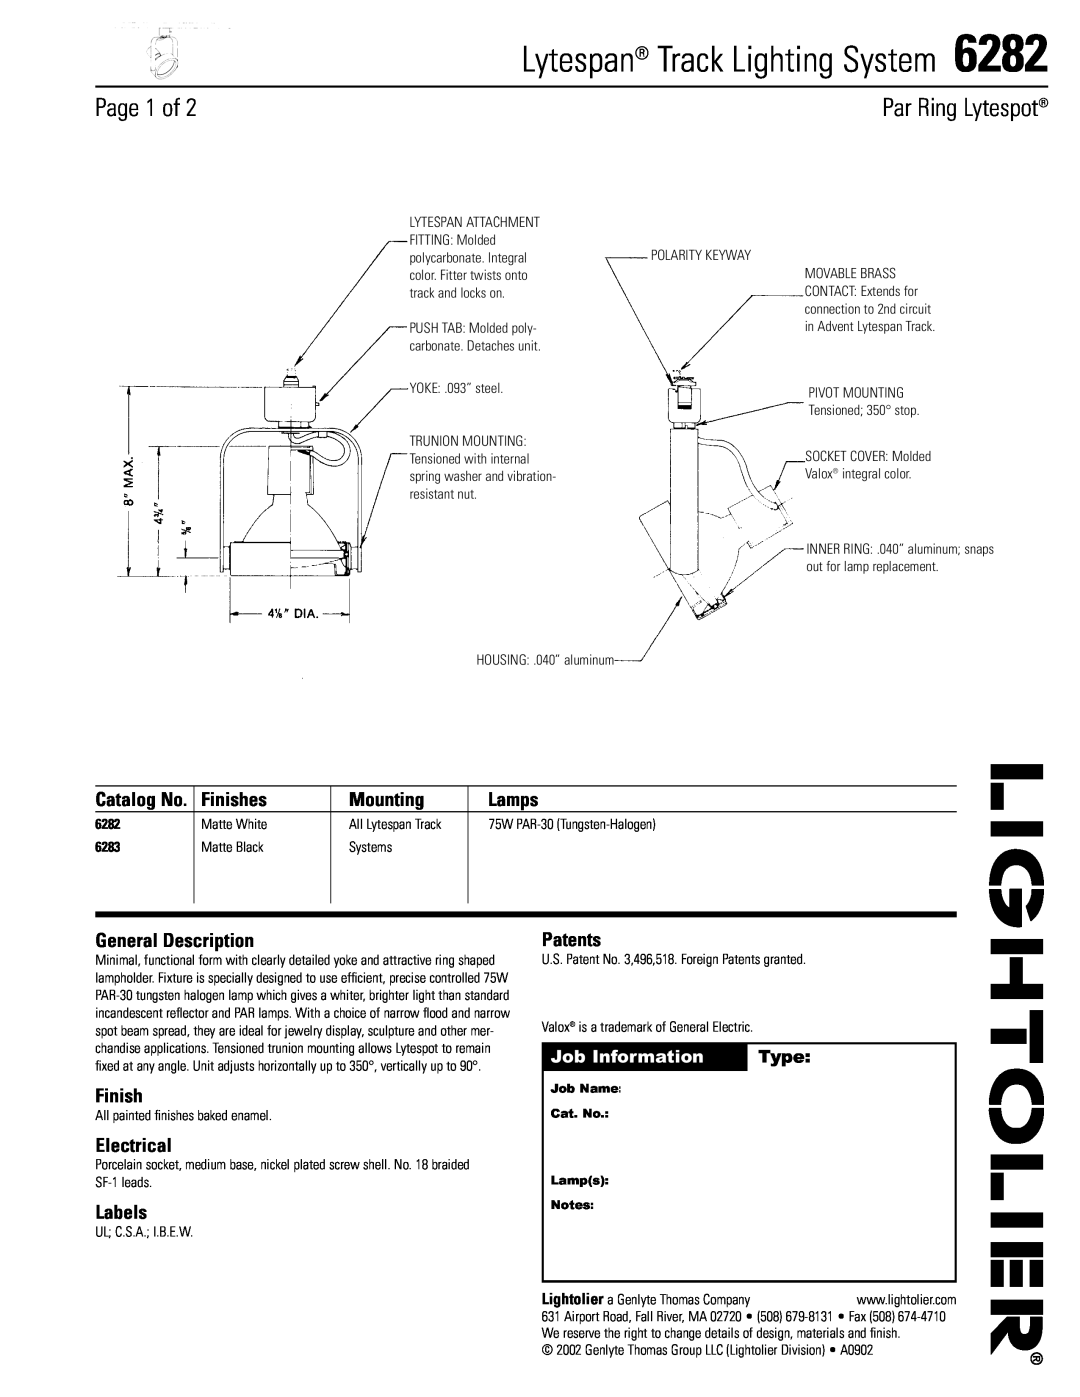 Lightolier 6282 manual Lytespan Track Lighting System, Page 1 of, Par Ring Lytespot, Finishes, Mounting, Lamps, Electrical 